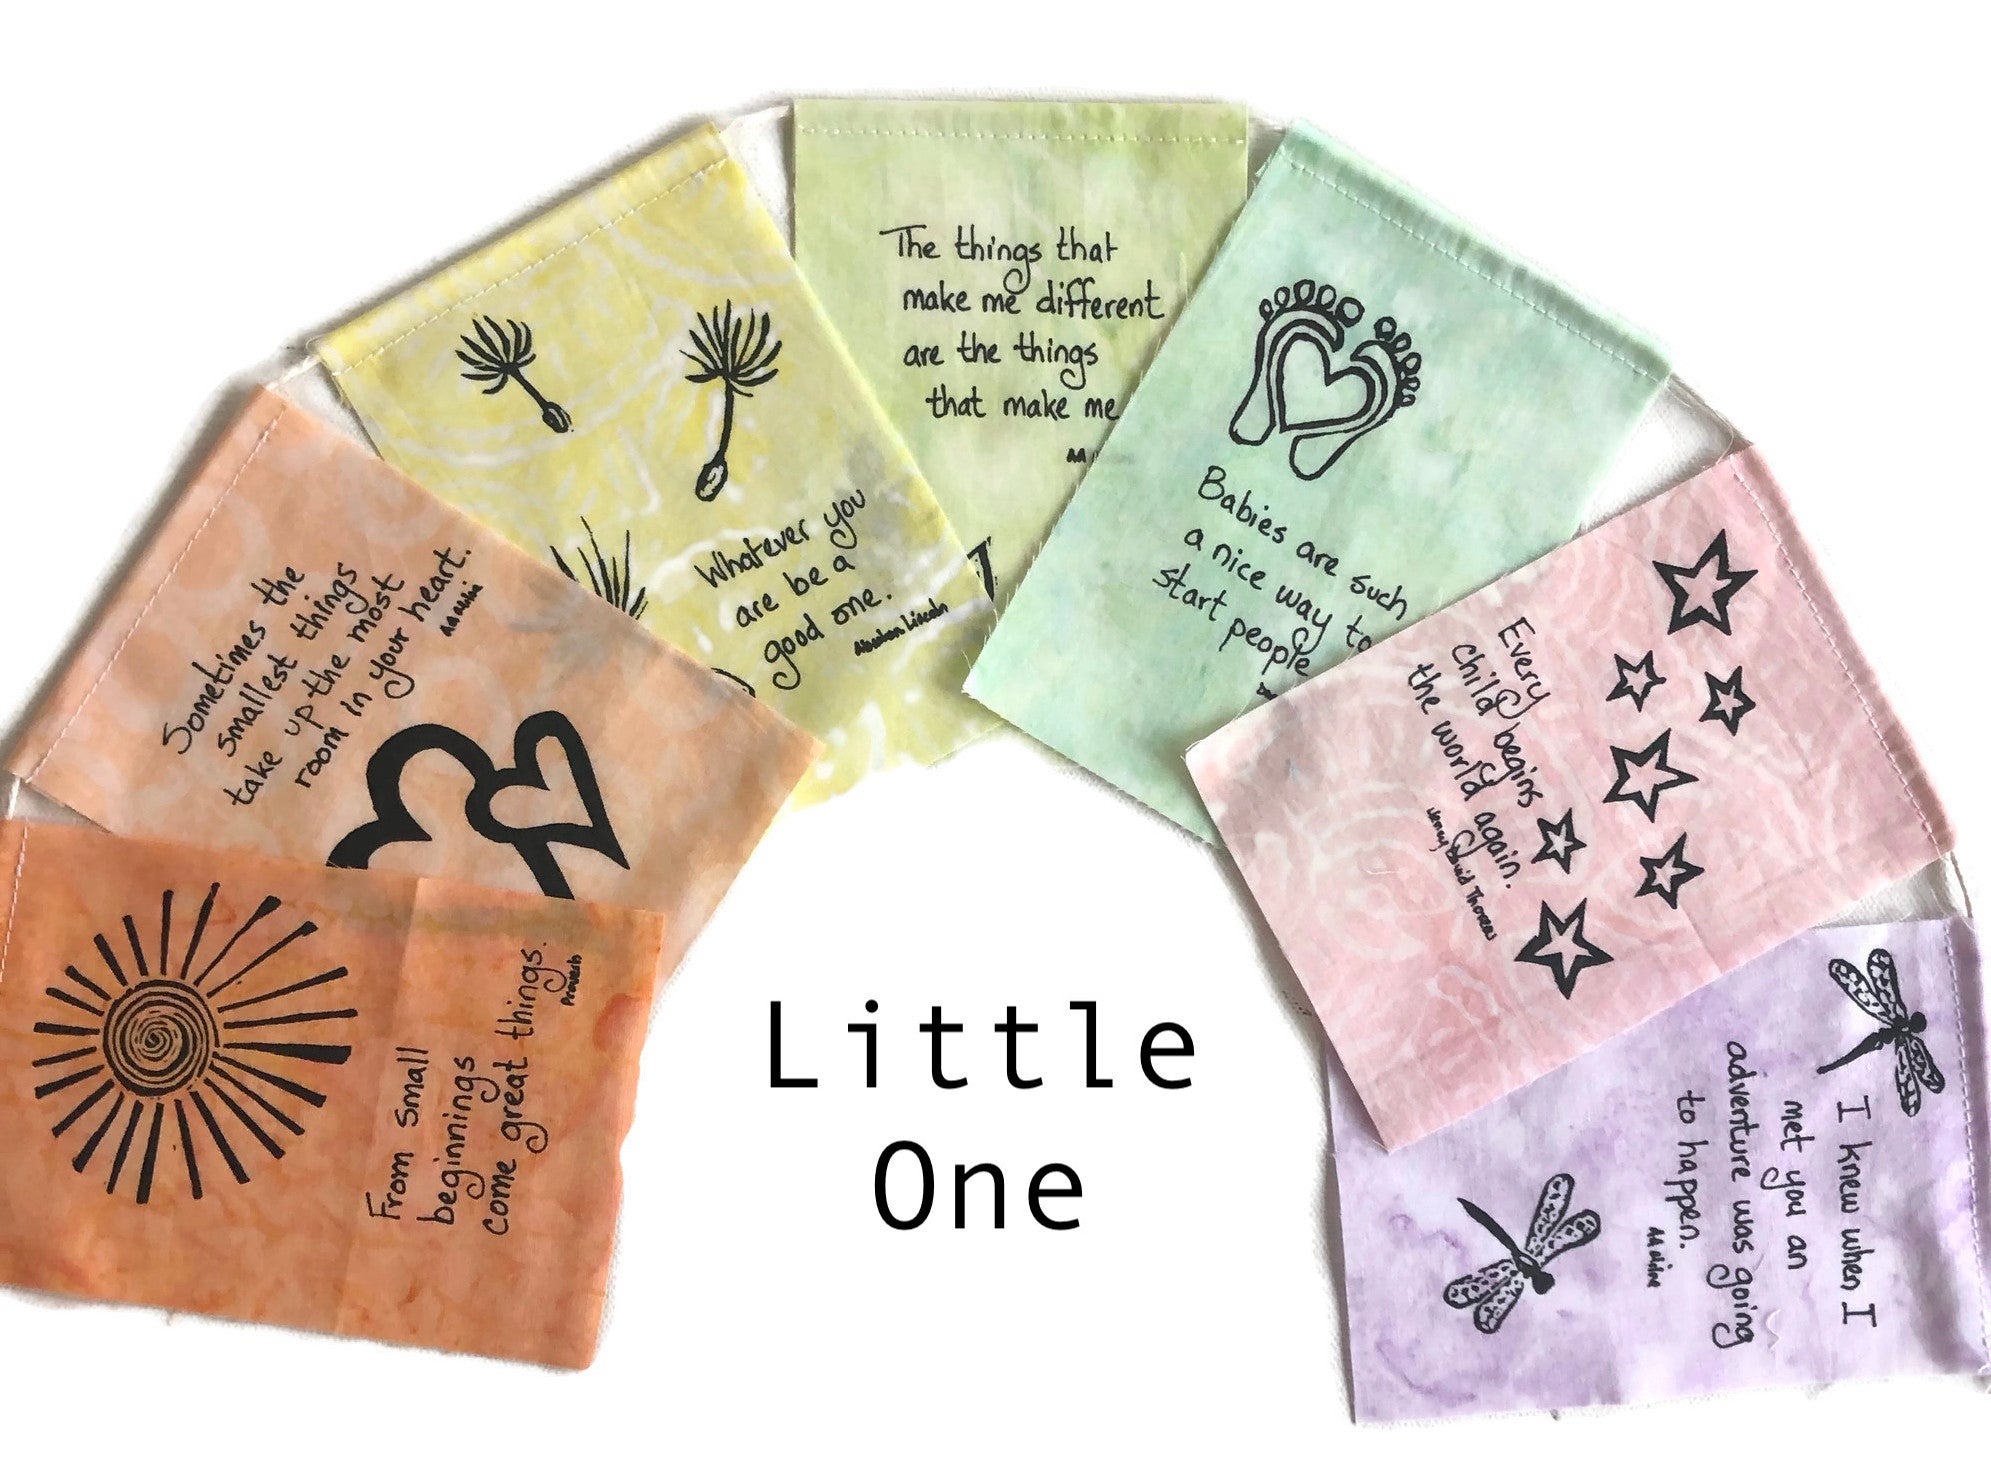 Small Flag Set with images and words to welcome a new baby